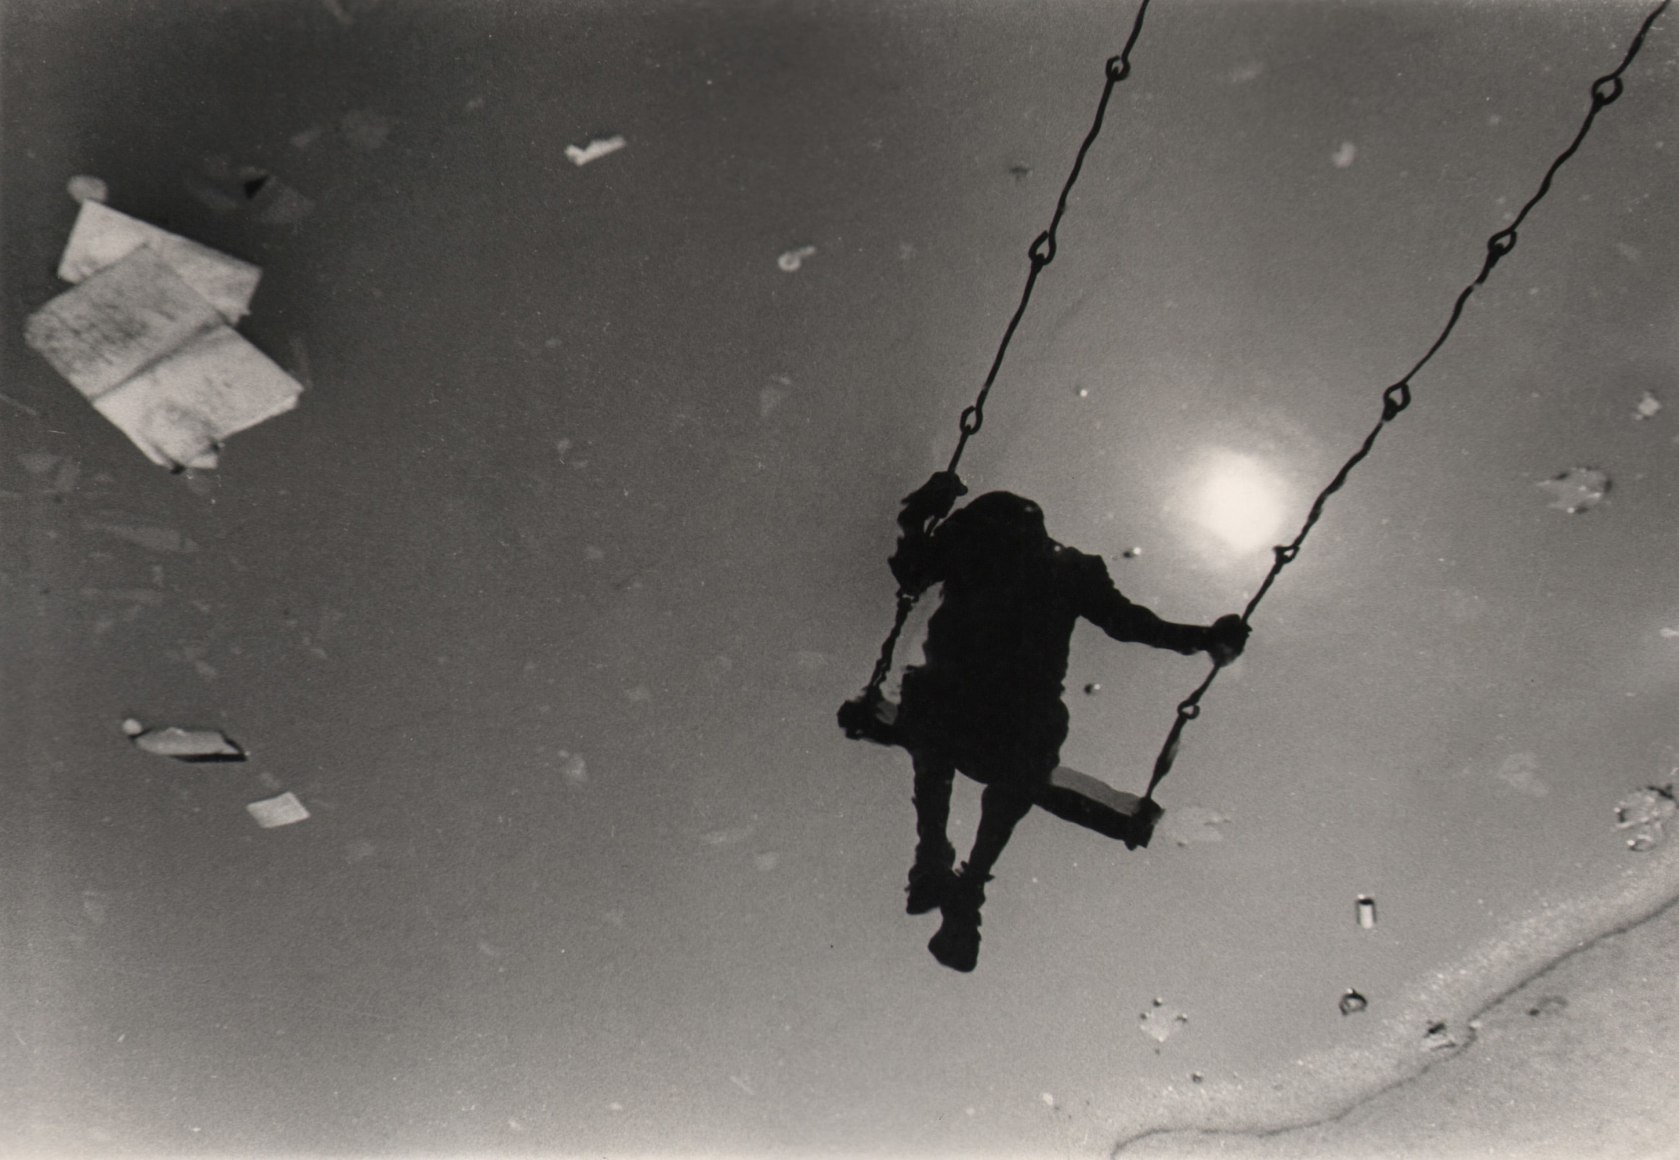 33. Beuford Smith, East 12th Street Park, NYC, (Boy on Swing), ​1968. Reflection of a silhouetted boy on a swing.